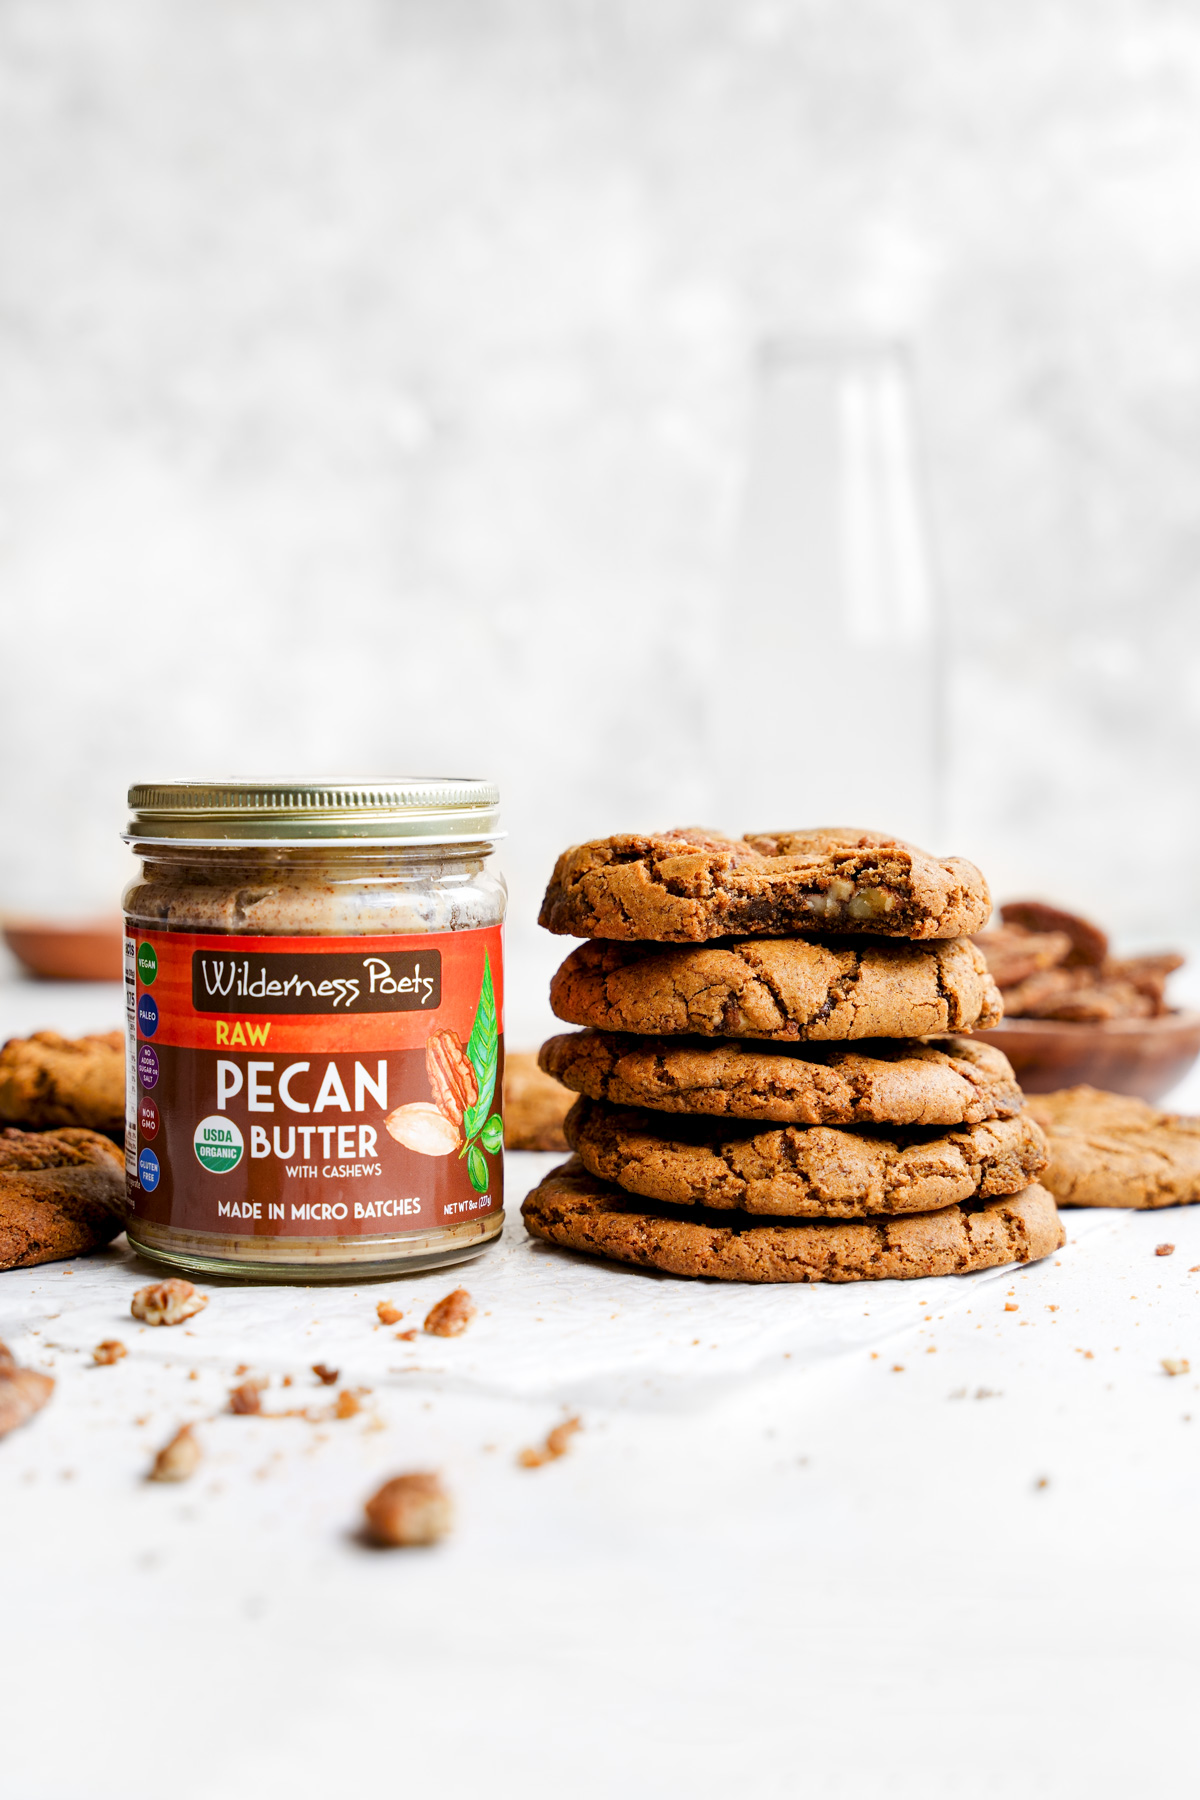 the pecan cookies stacked on top of each other next to the wilderness poets pecan butter jar